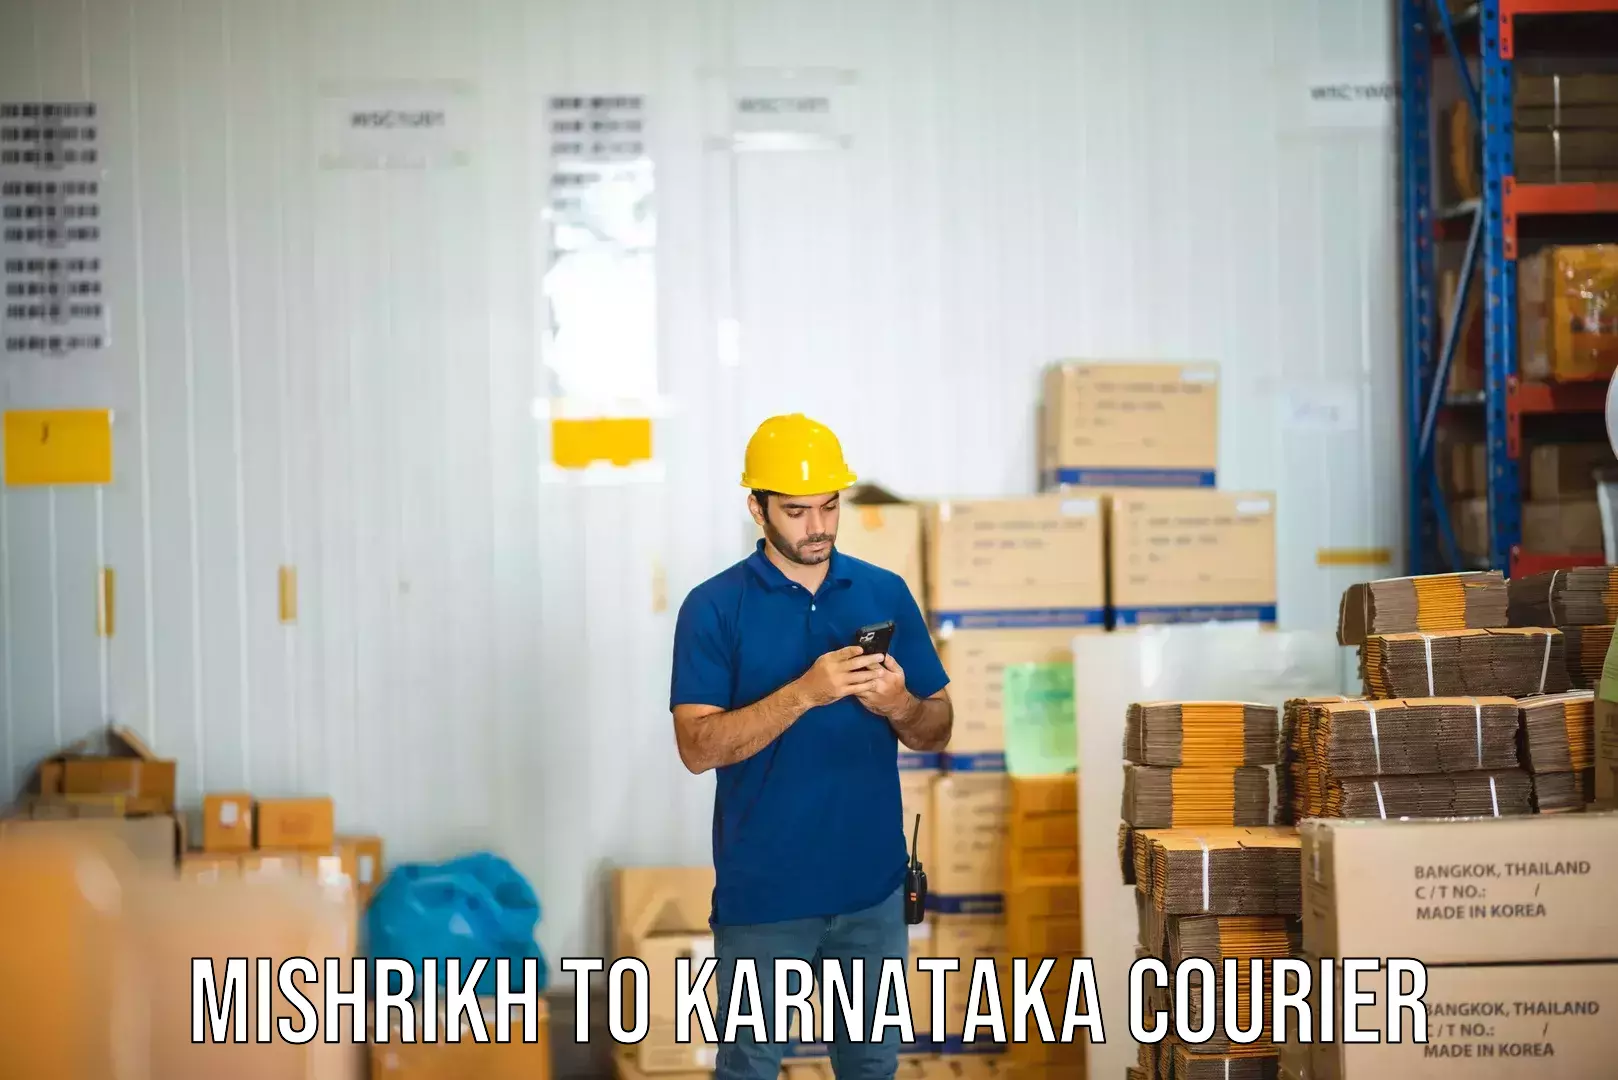 State-of-the-art courier technology Mishrikh to Nagamangala